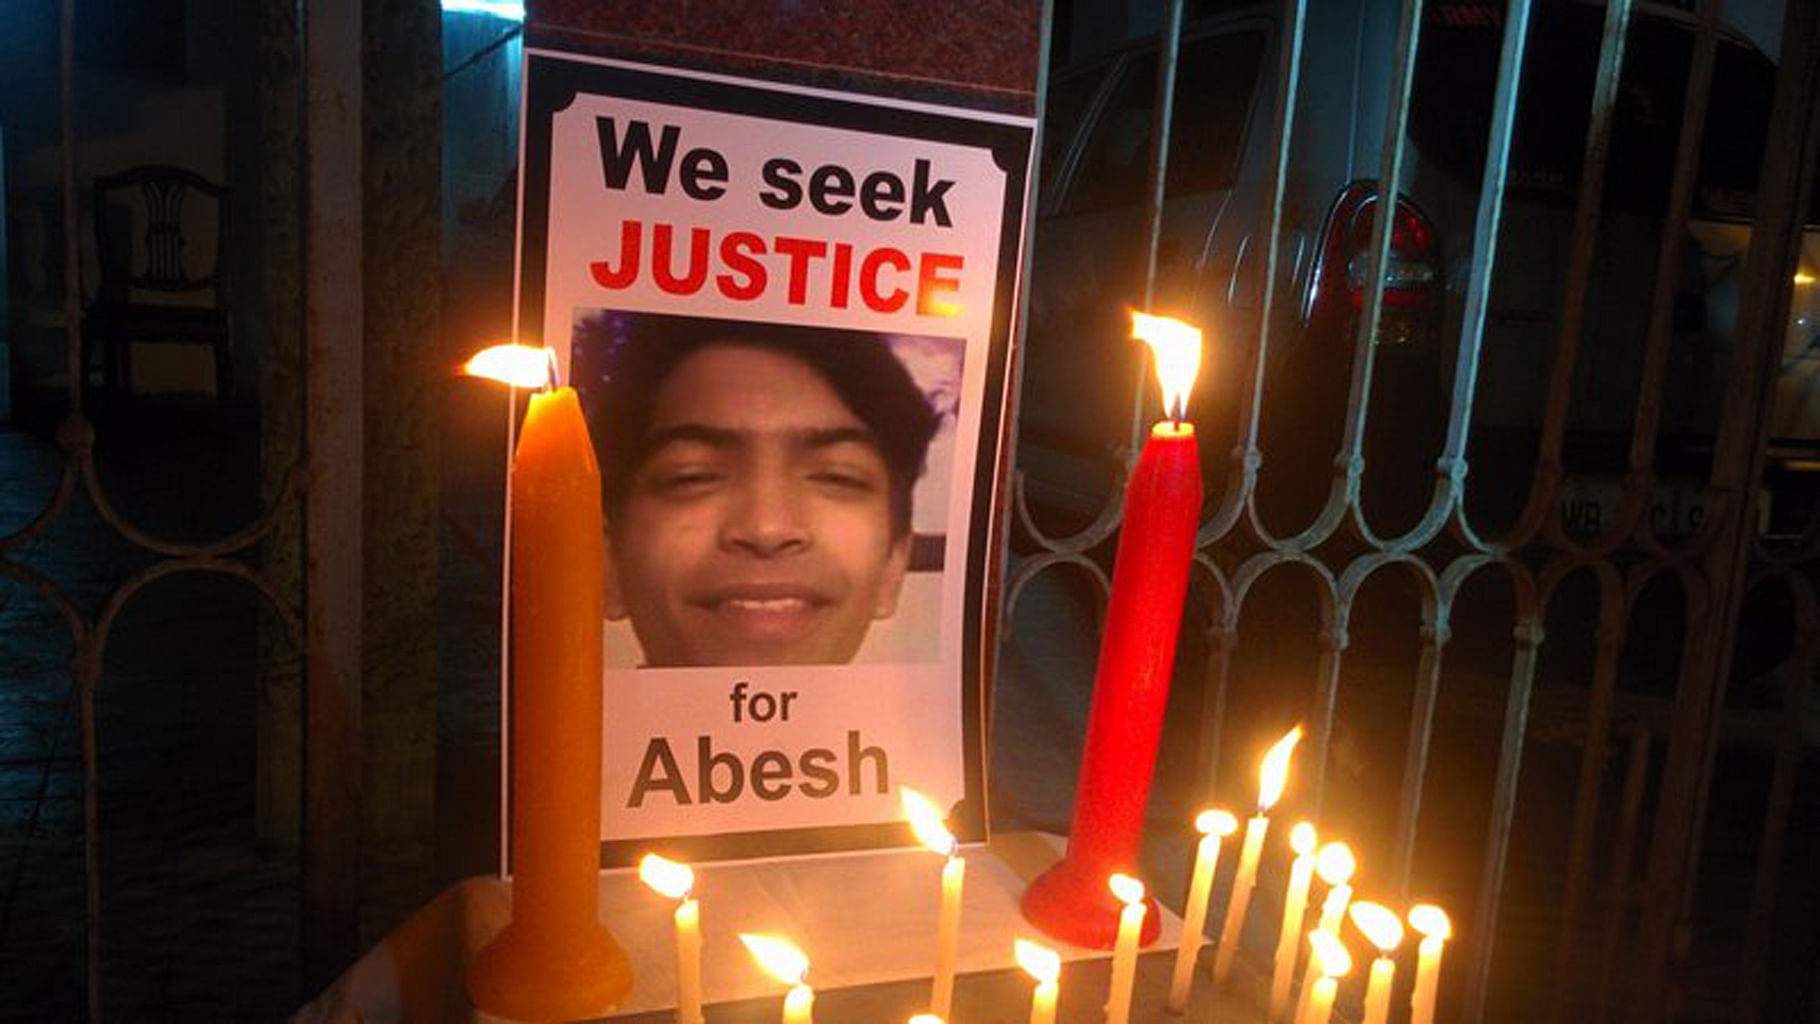 Abesh was found in a pool of blood in the ground floor car park of the apartment complex in South Kolkata’s Ballygunge. (Photo: <a href="https://www.change.org/p/chief-minister-mamata-banerjee-justice-for-aabesh-dasgupta?recruiter=578870483&amp;utm_campaign=signature_receipt_fb_dialog&amp;utm_medium=facebook&amp;utm_source=share_petition">www.change.org</a>)